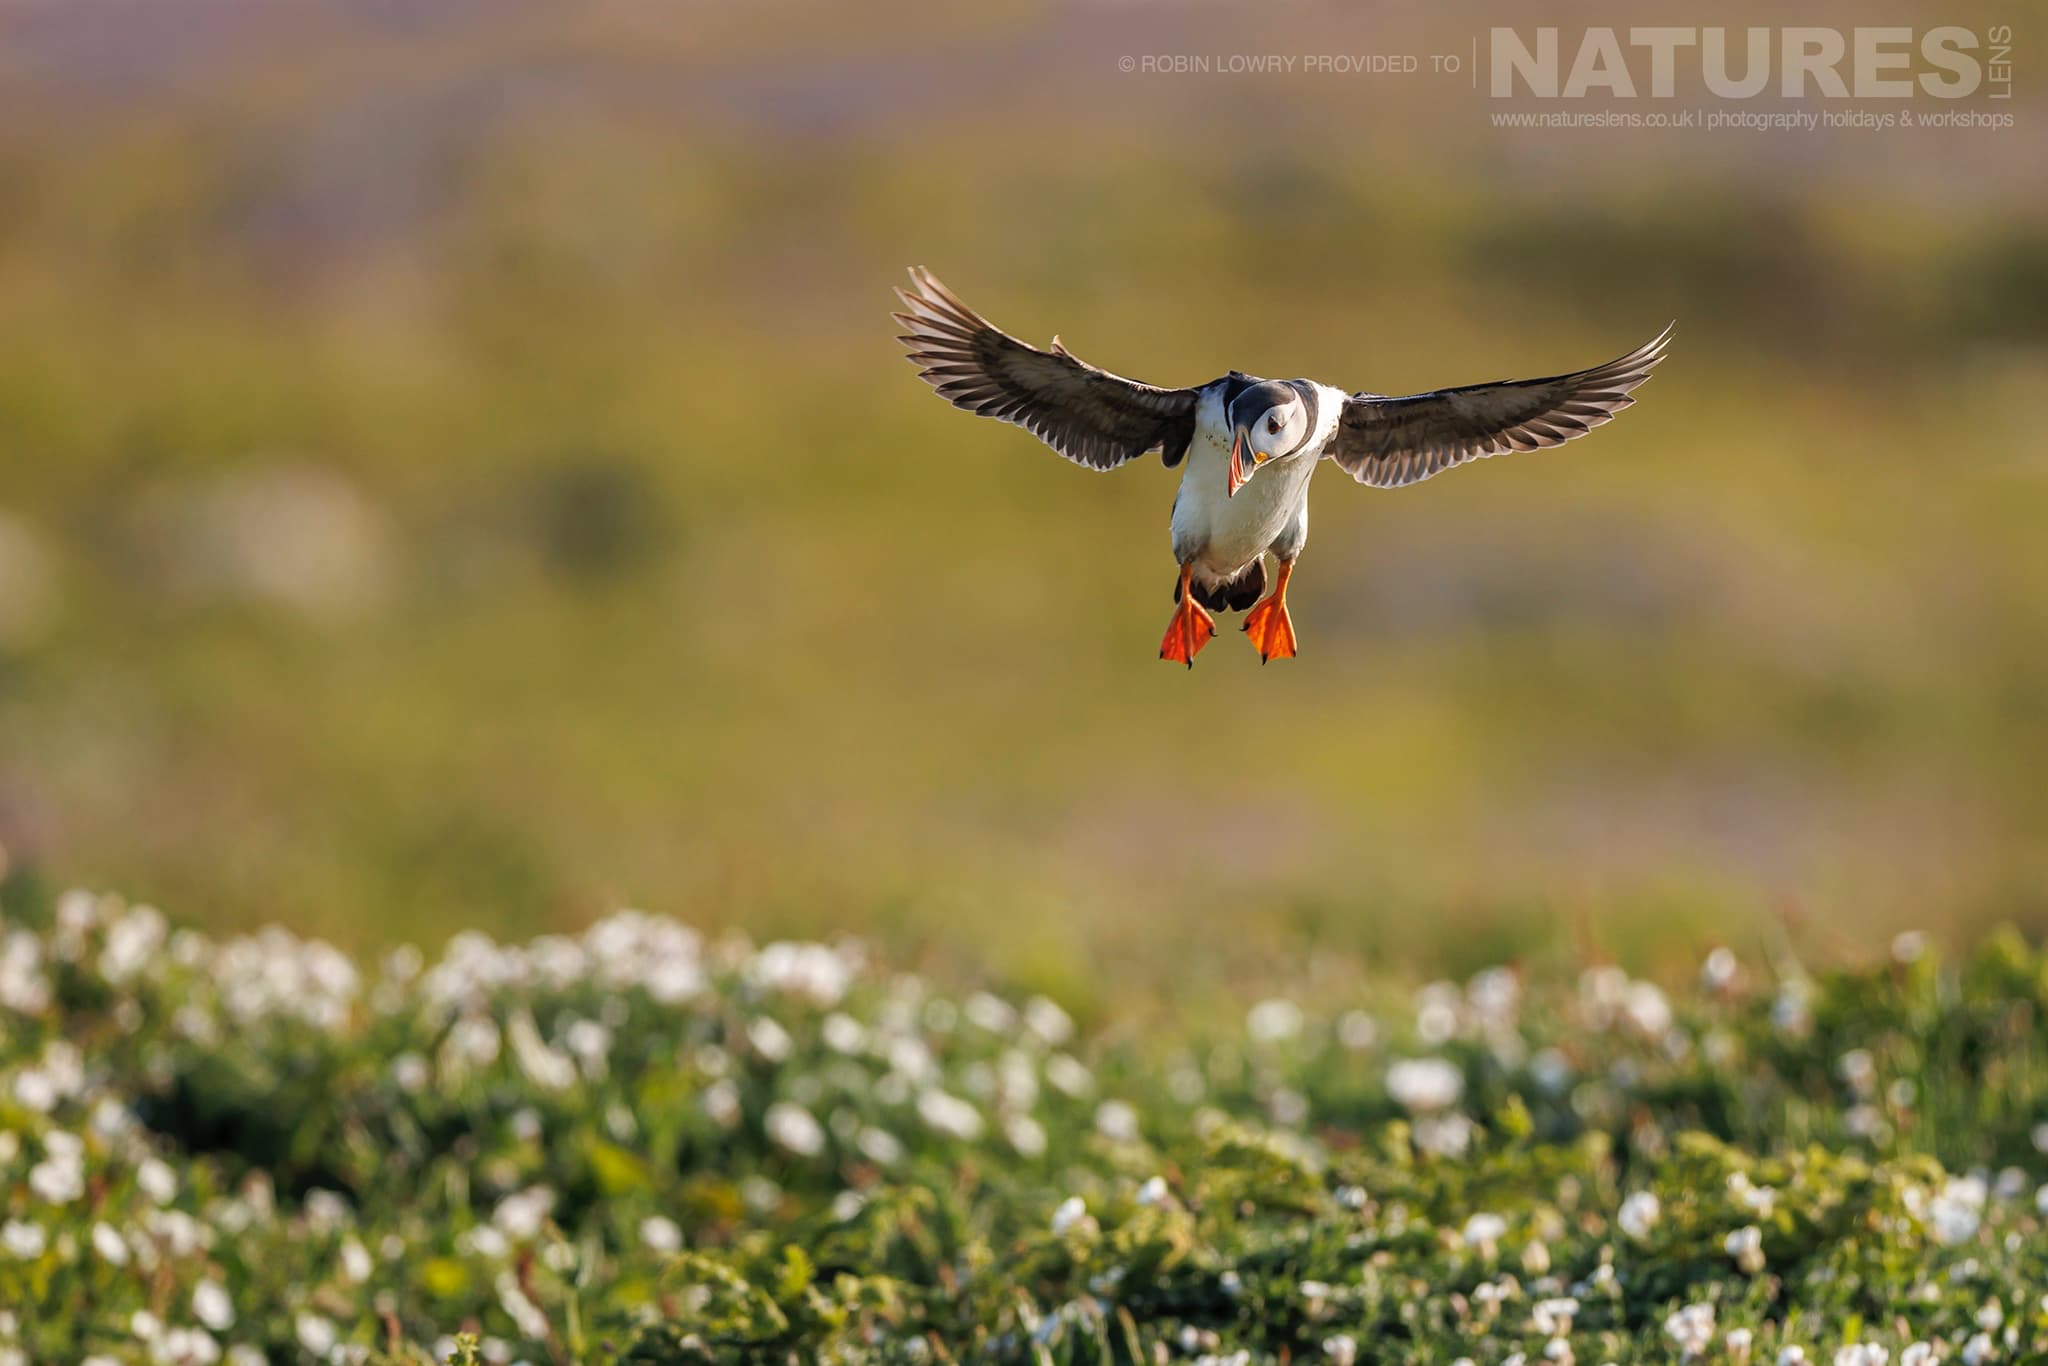 One Of Skomer'S Atlantic Puffins Comes In To Land Above The Sea Campion Photographed By Robin Lowry Whilst Guiding A Natureslens Atlantic Puffins Photography Holiday